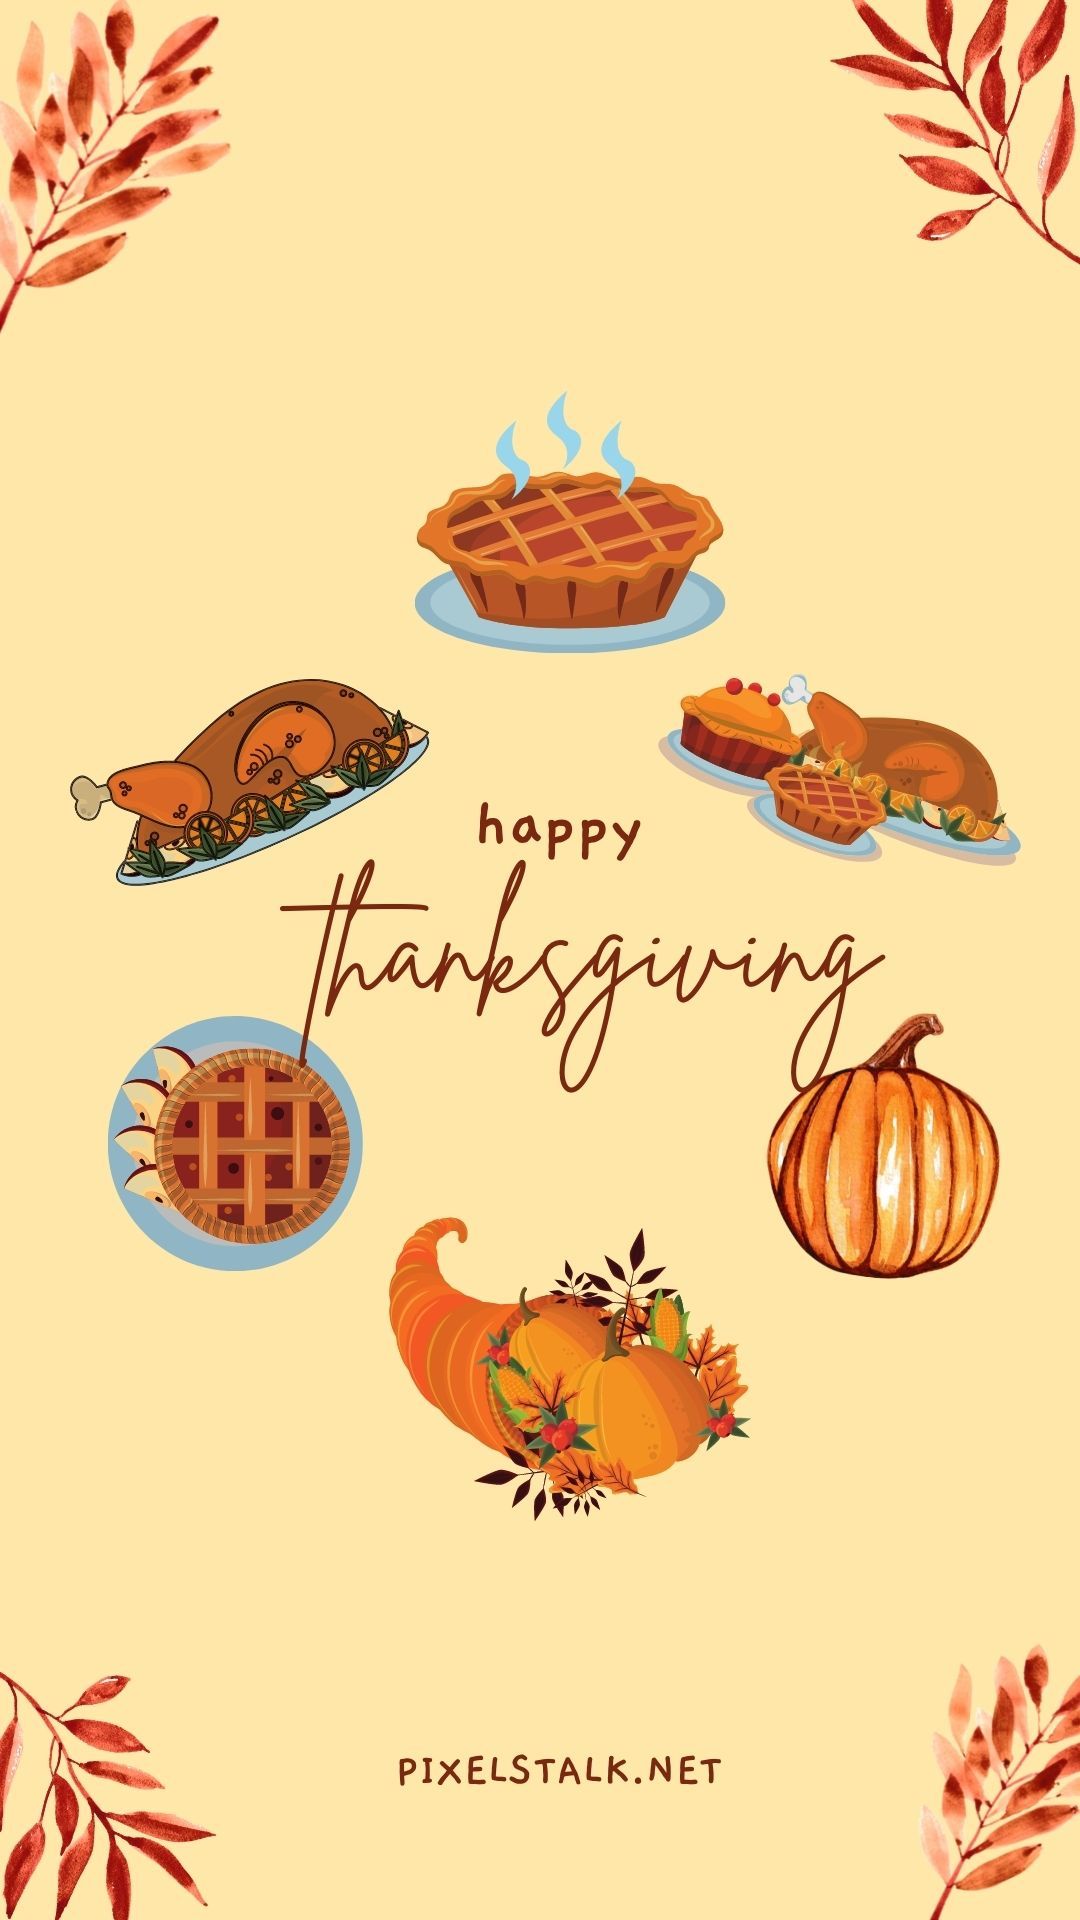 Thanksgiving background with traditional dishes and fall leaves. - Thanksgiving